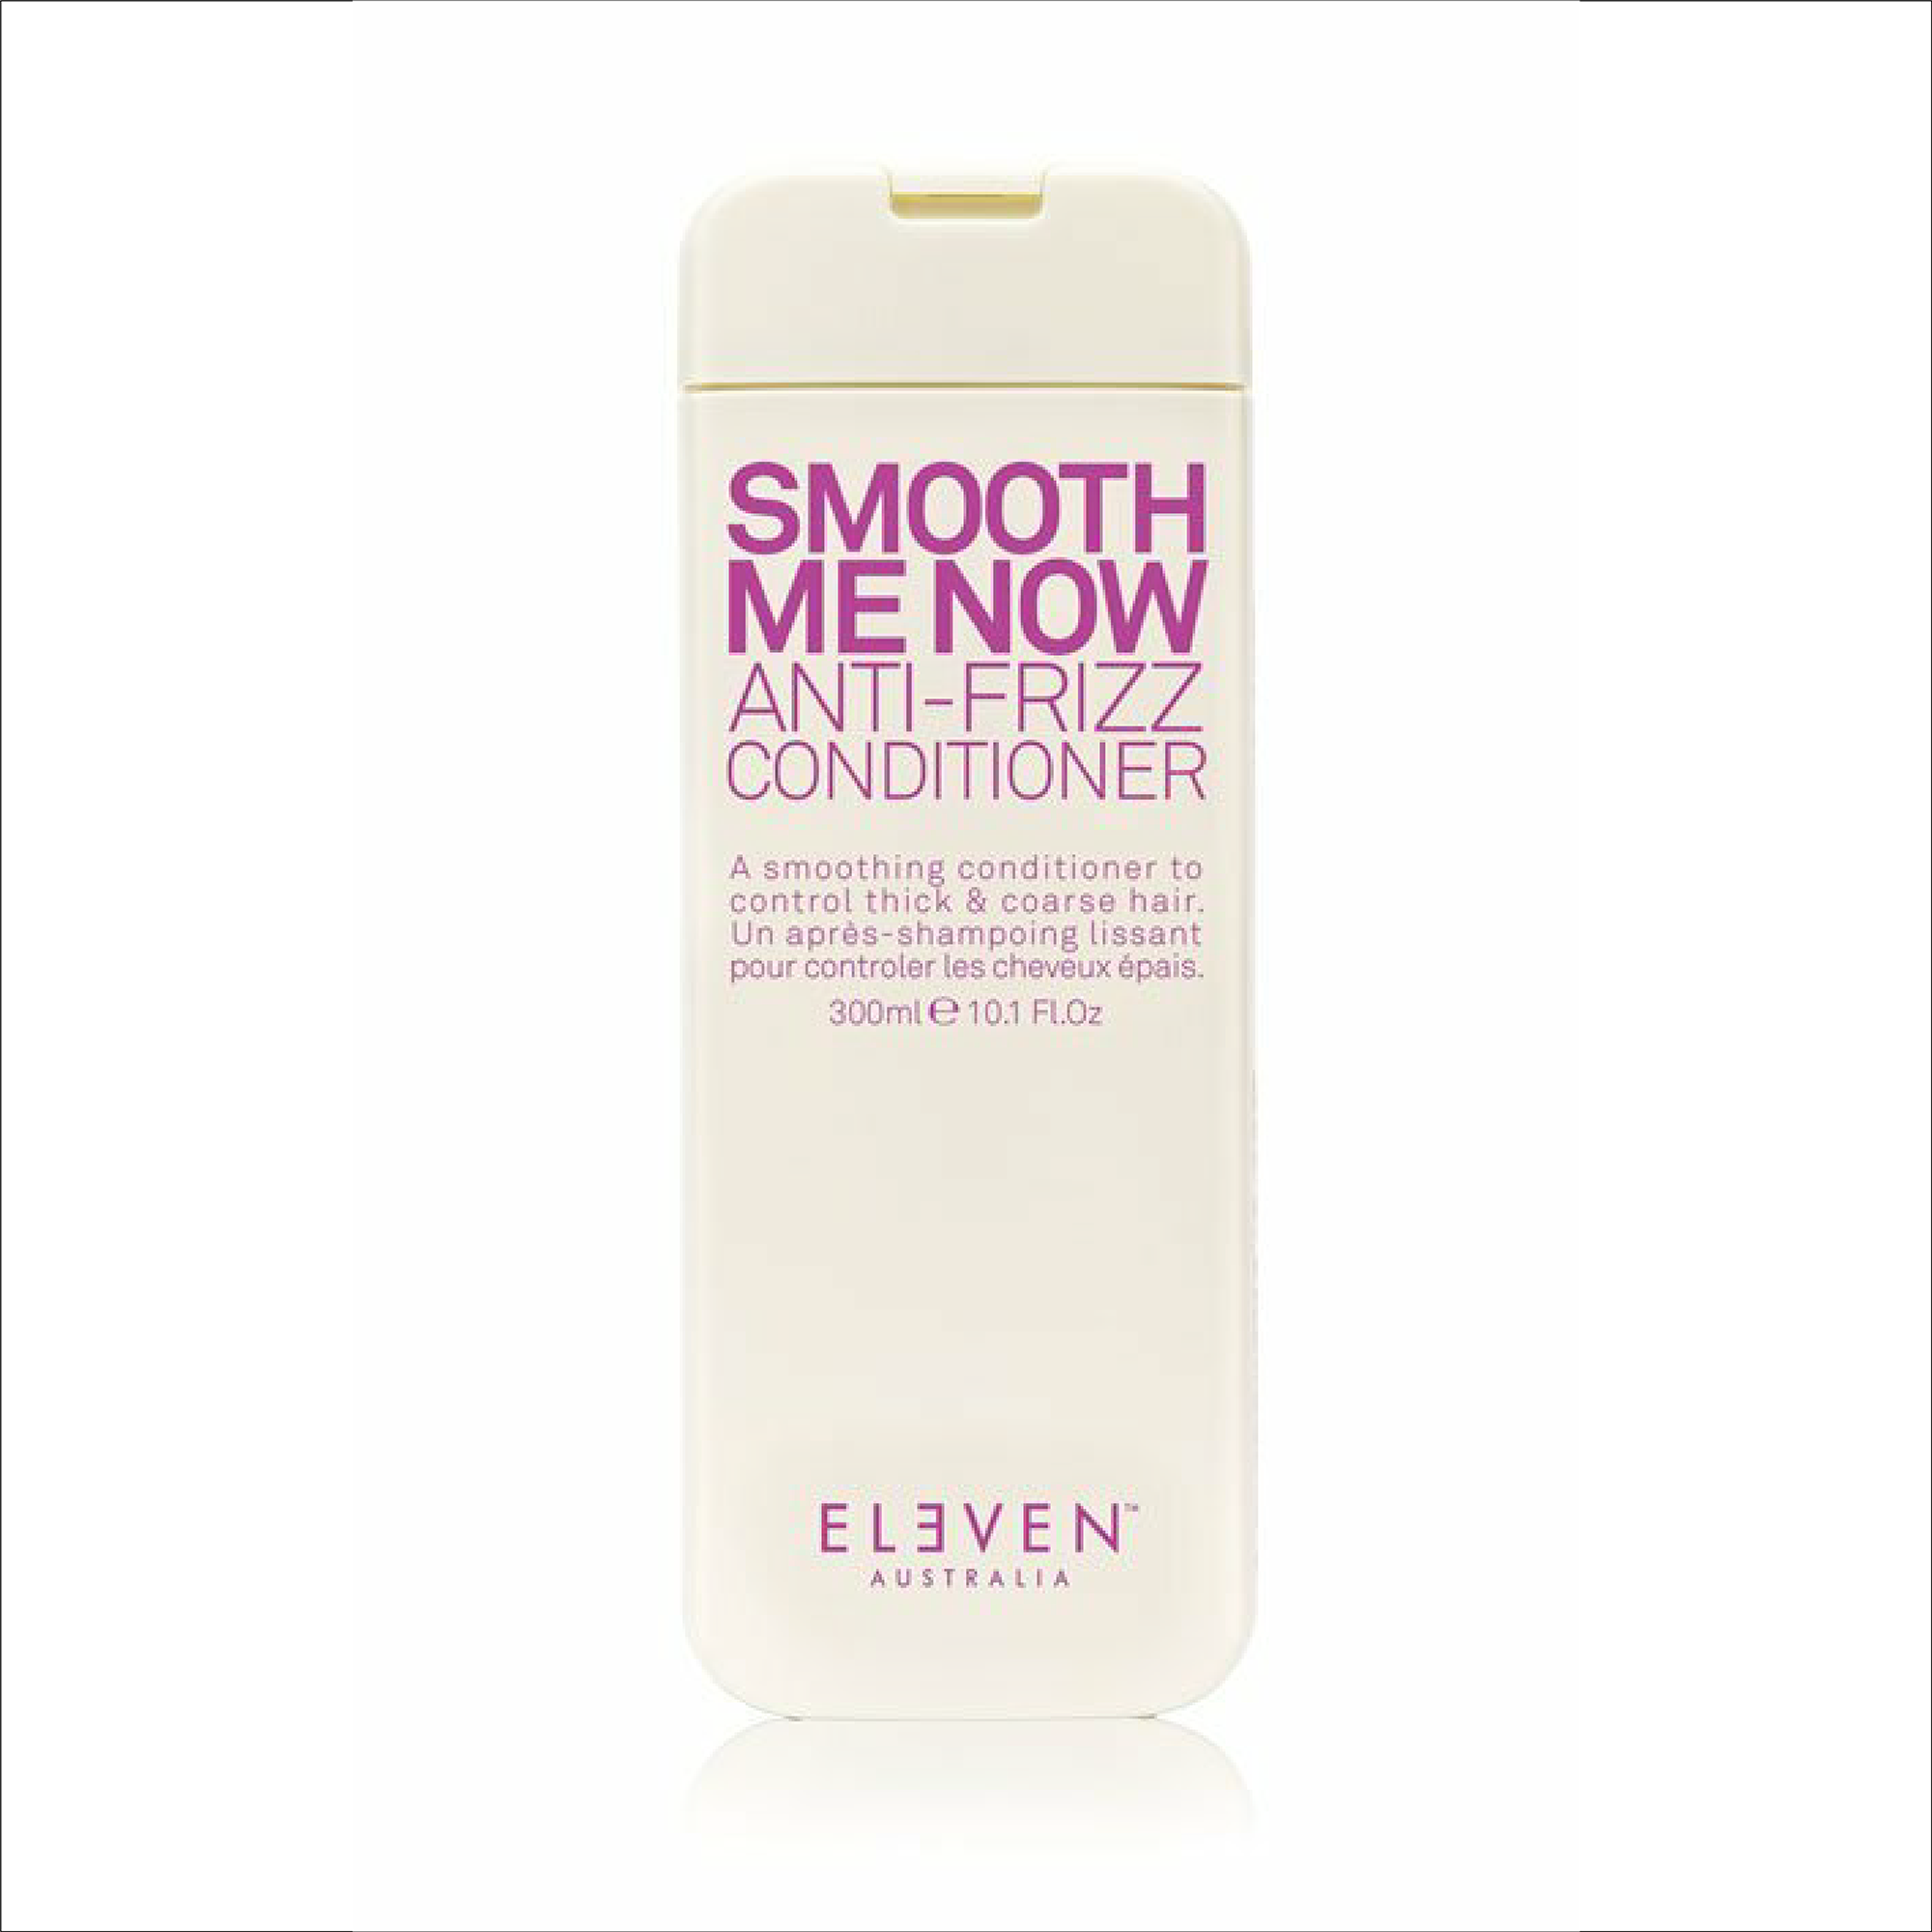 Smooth Me Now Anti-frizz Conditioner